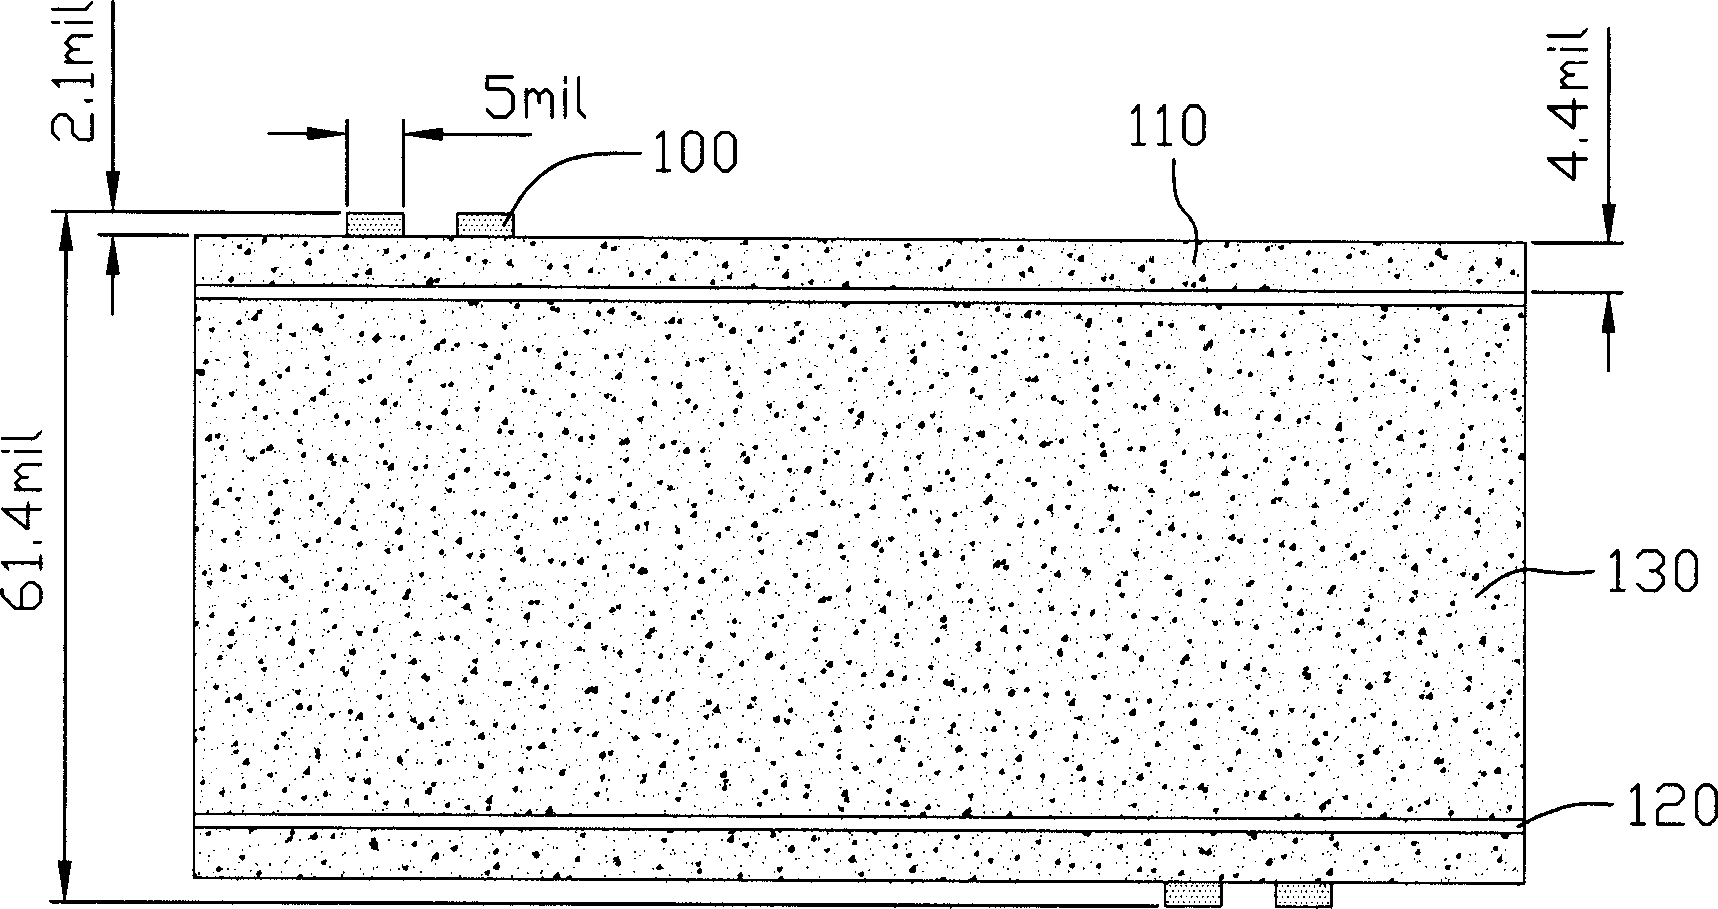 Double layer printed circuit board capable of implementing impedance control